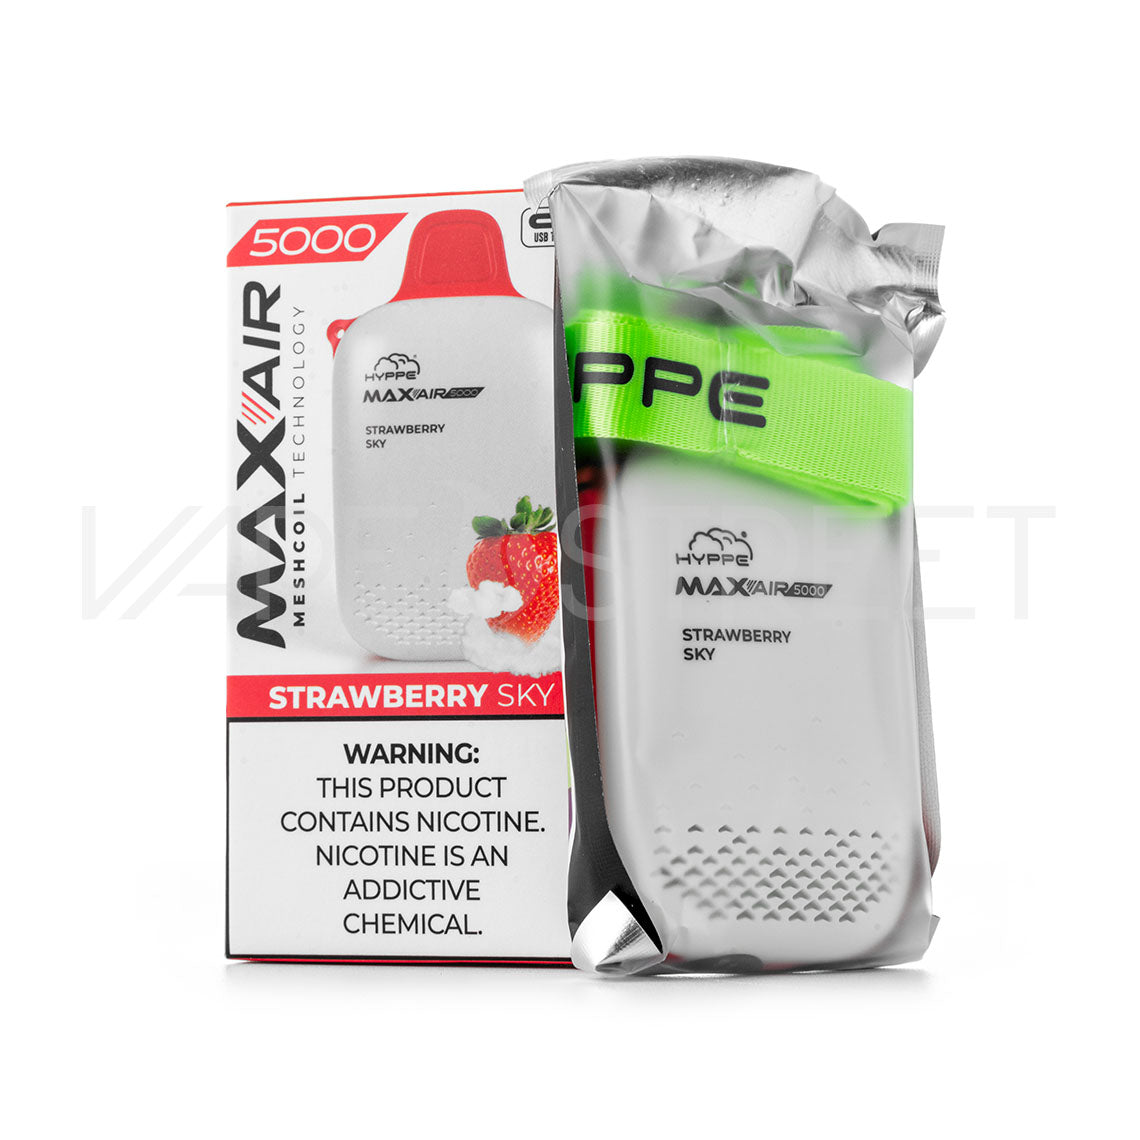 Hyppe Max Air Disposable Device 5000 Puffs Lanyard